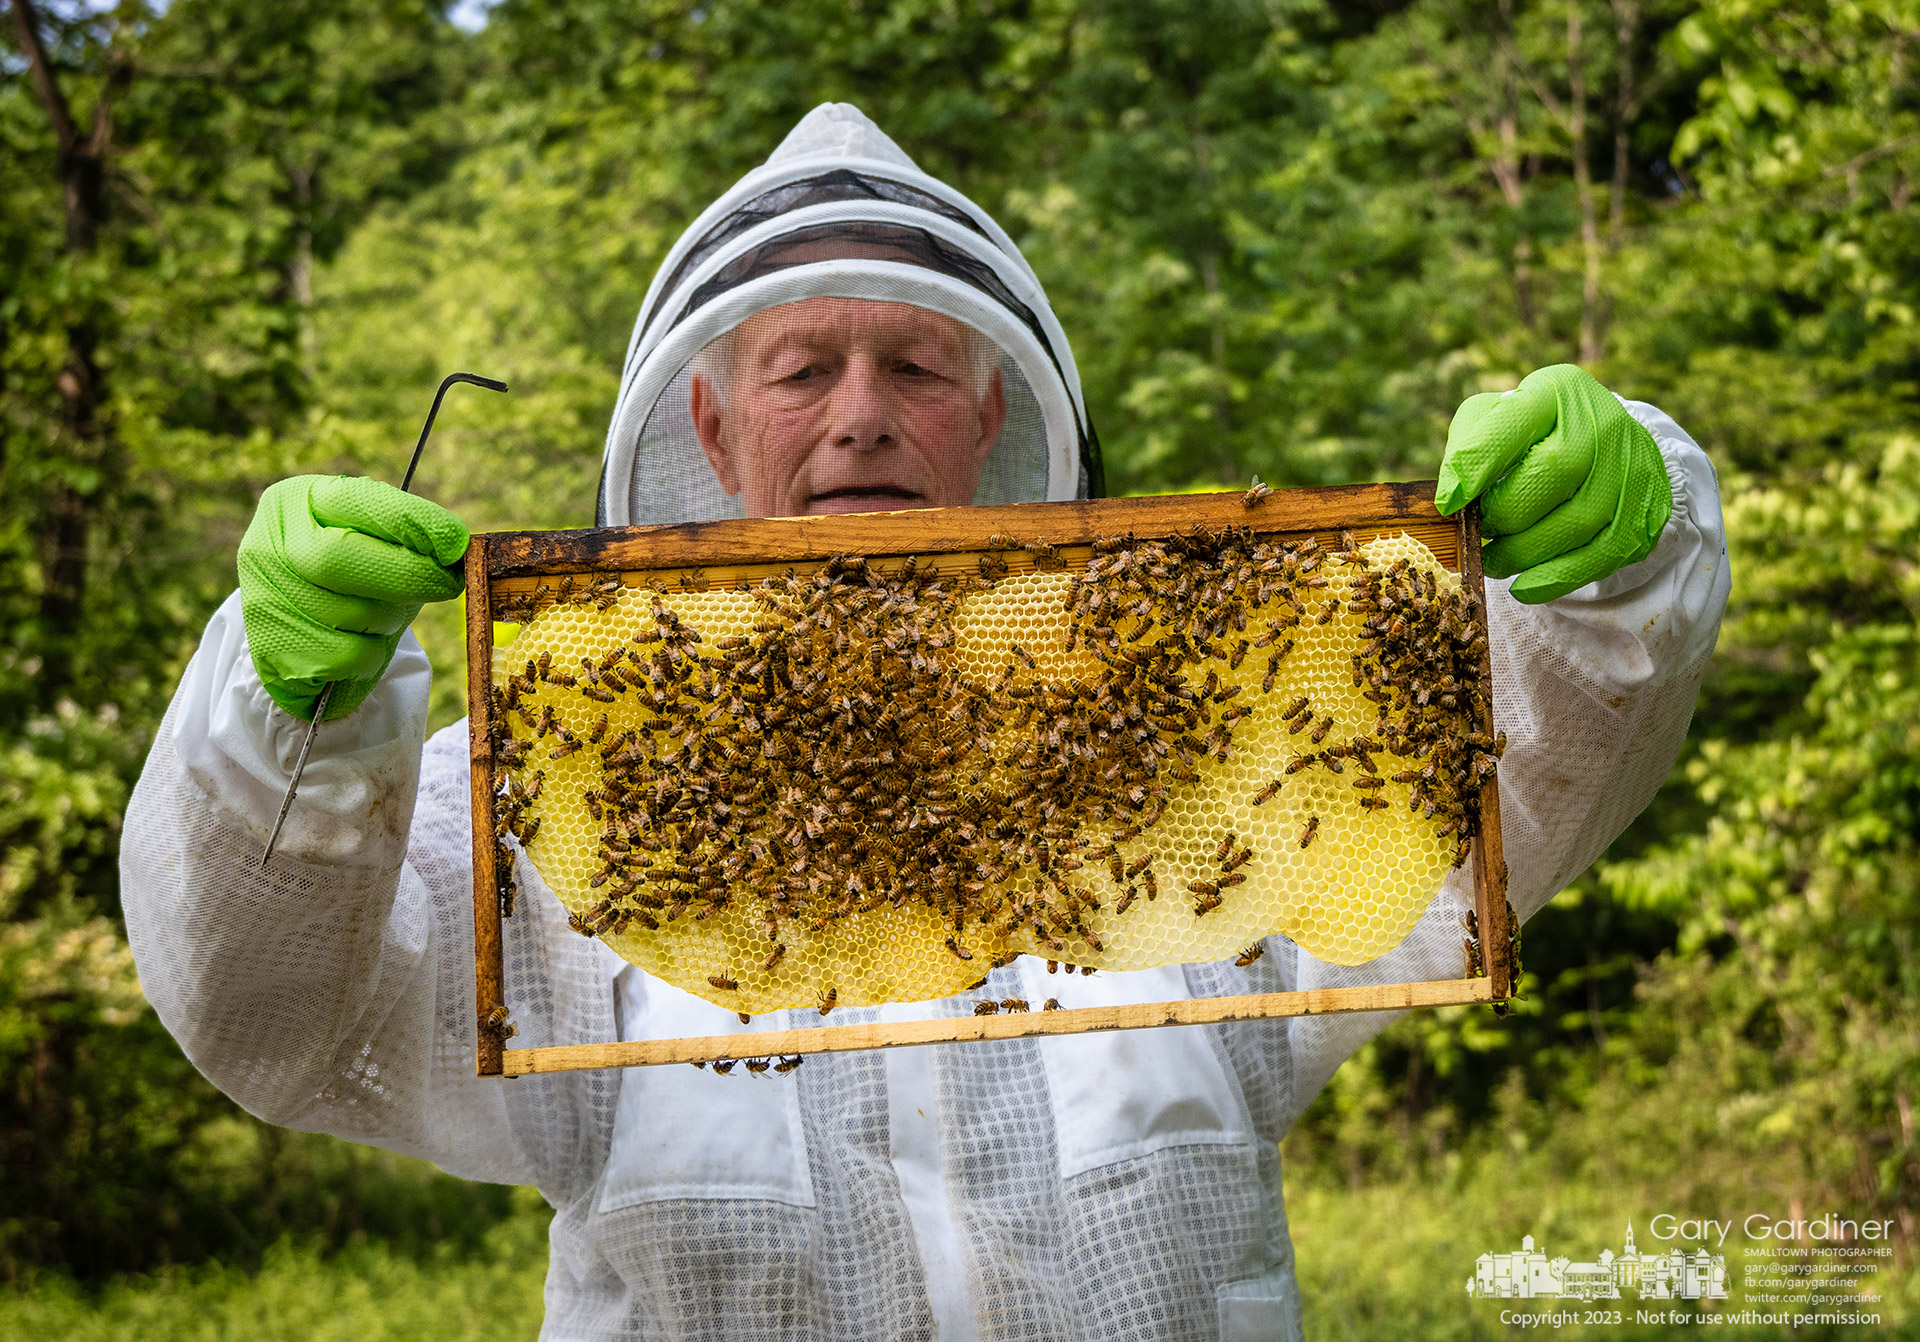 Beekeeper Billy Miller inspects one of the Sharon Woods Metro Park bee hives several weeks after installing the hives after a two-year absence in the park. My Final Photo for May 23, 2023.